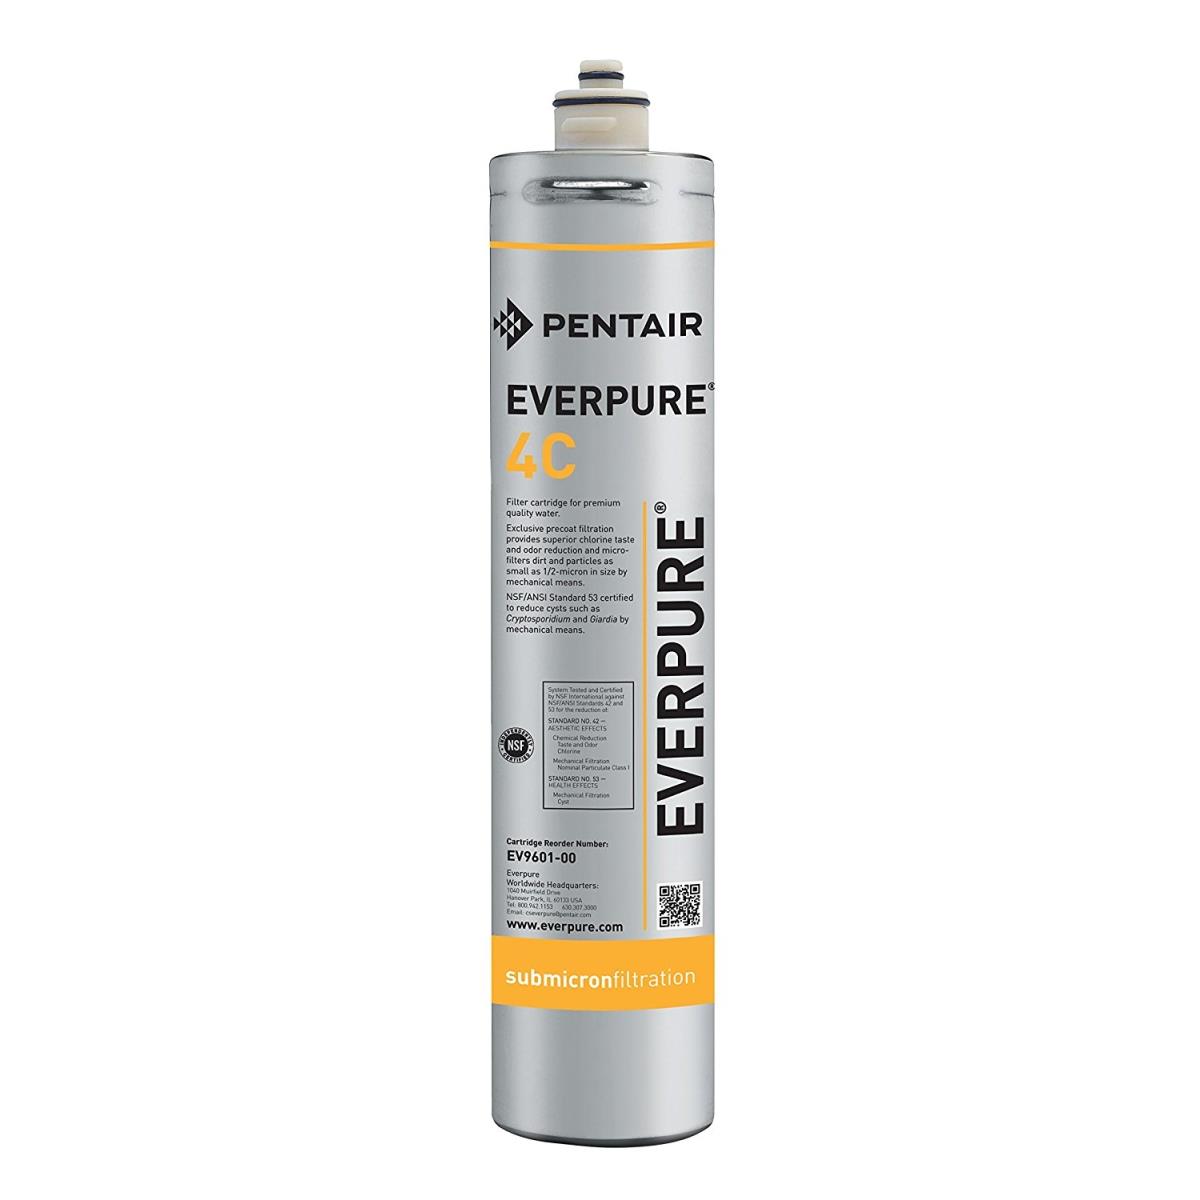 Picture of Commercial Water Distributing EVERPURE-EV9601-00 4C Replacement Cartridge